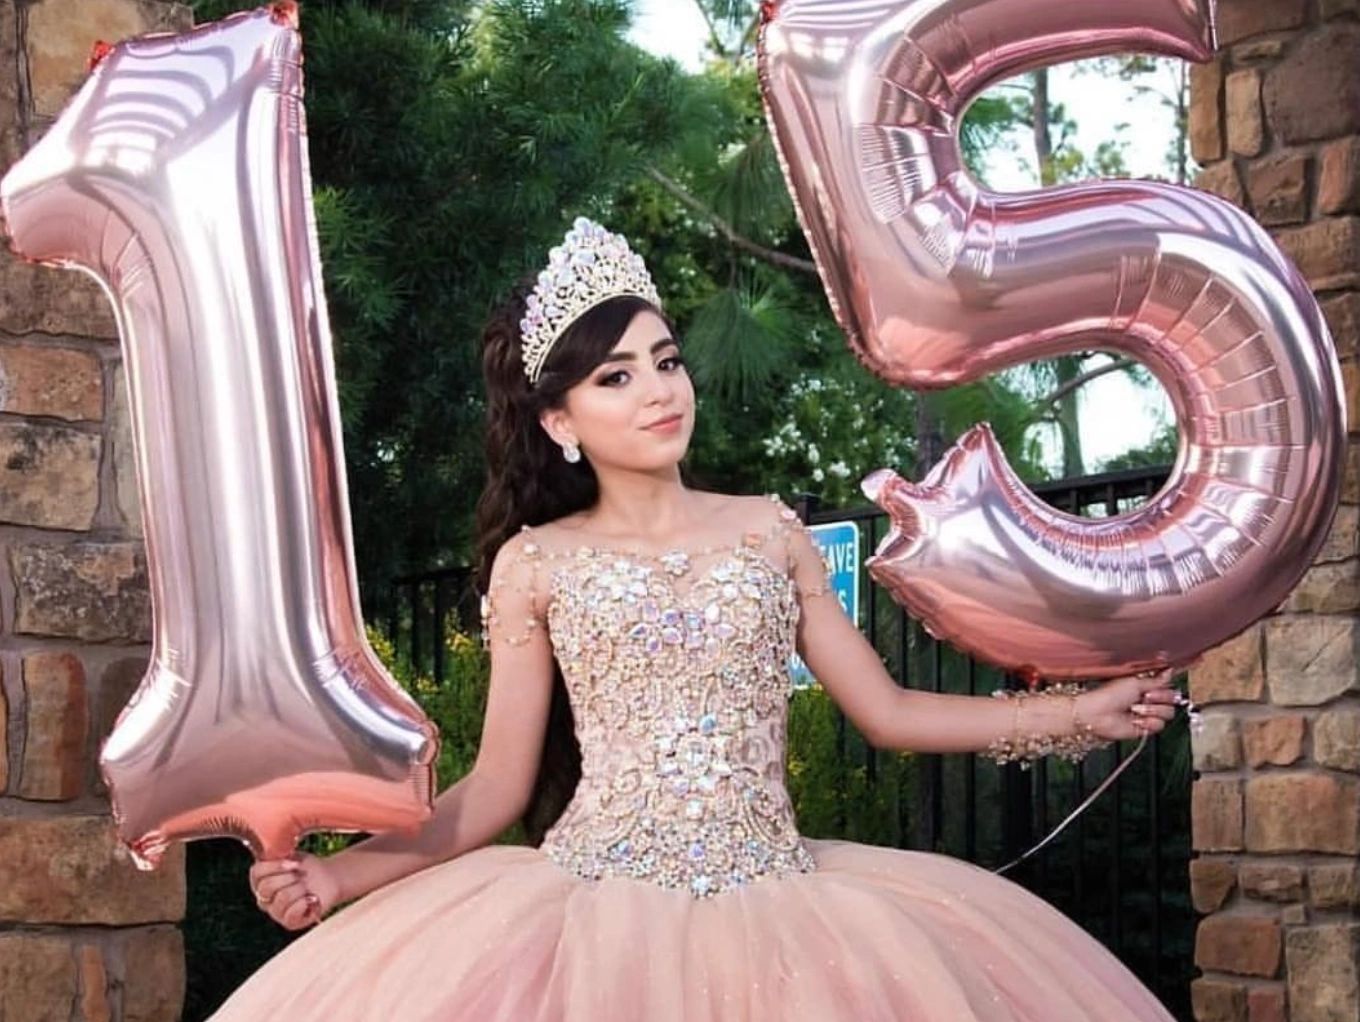 Event: Quinceañera girl with balloons